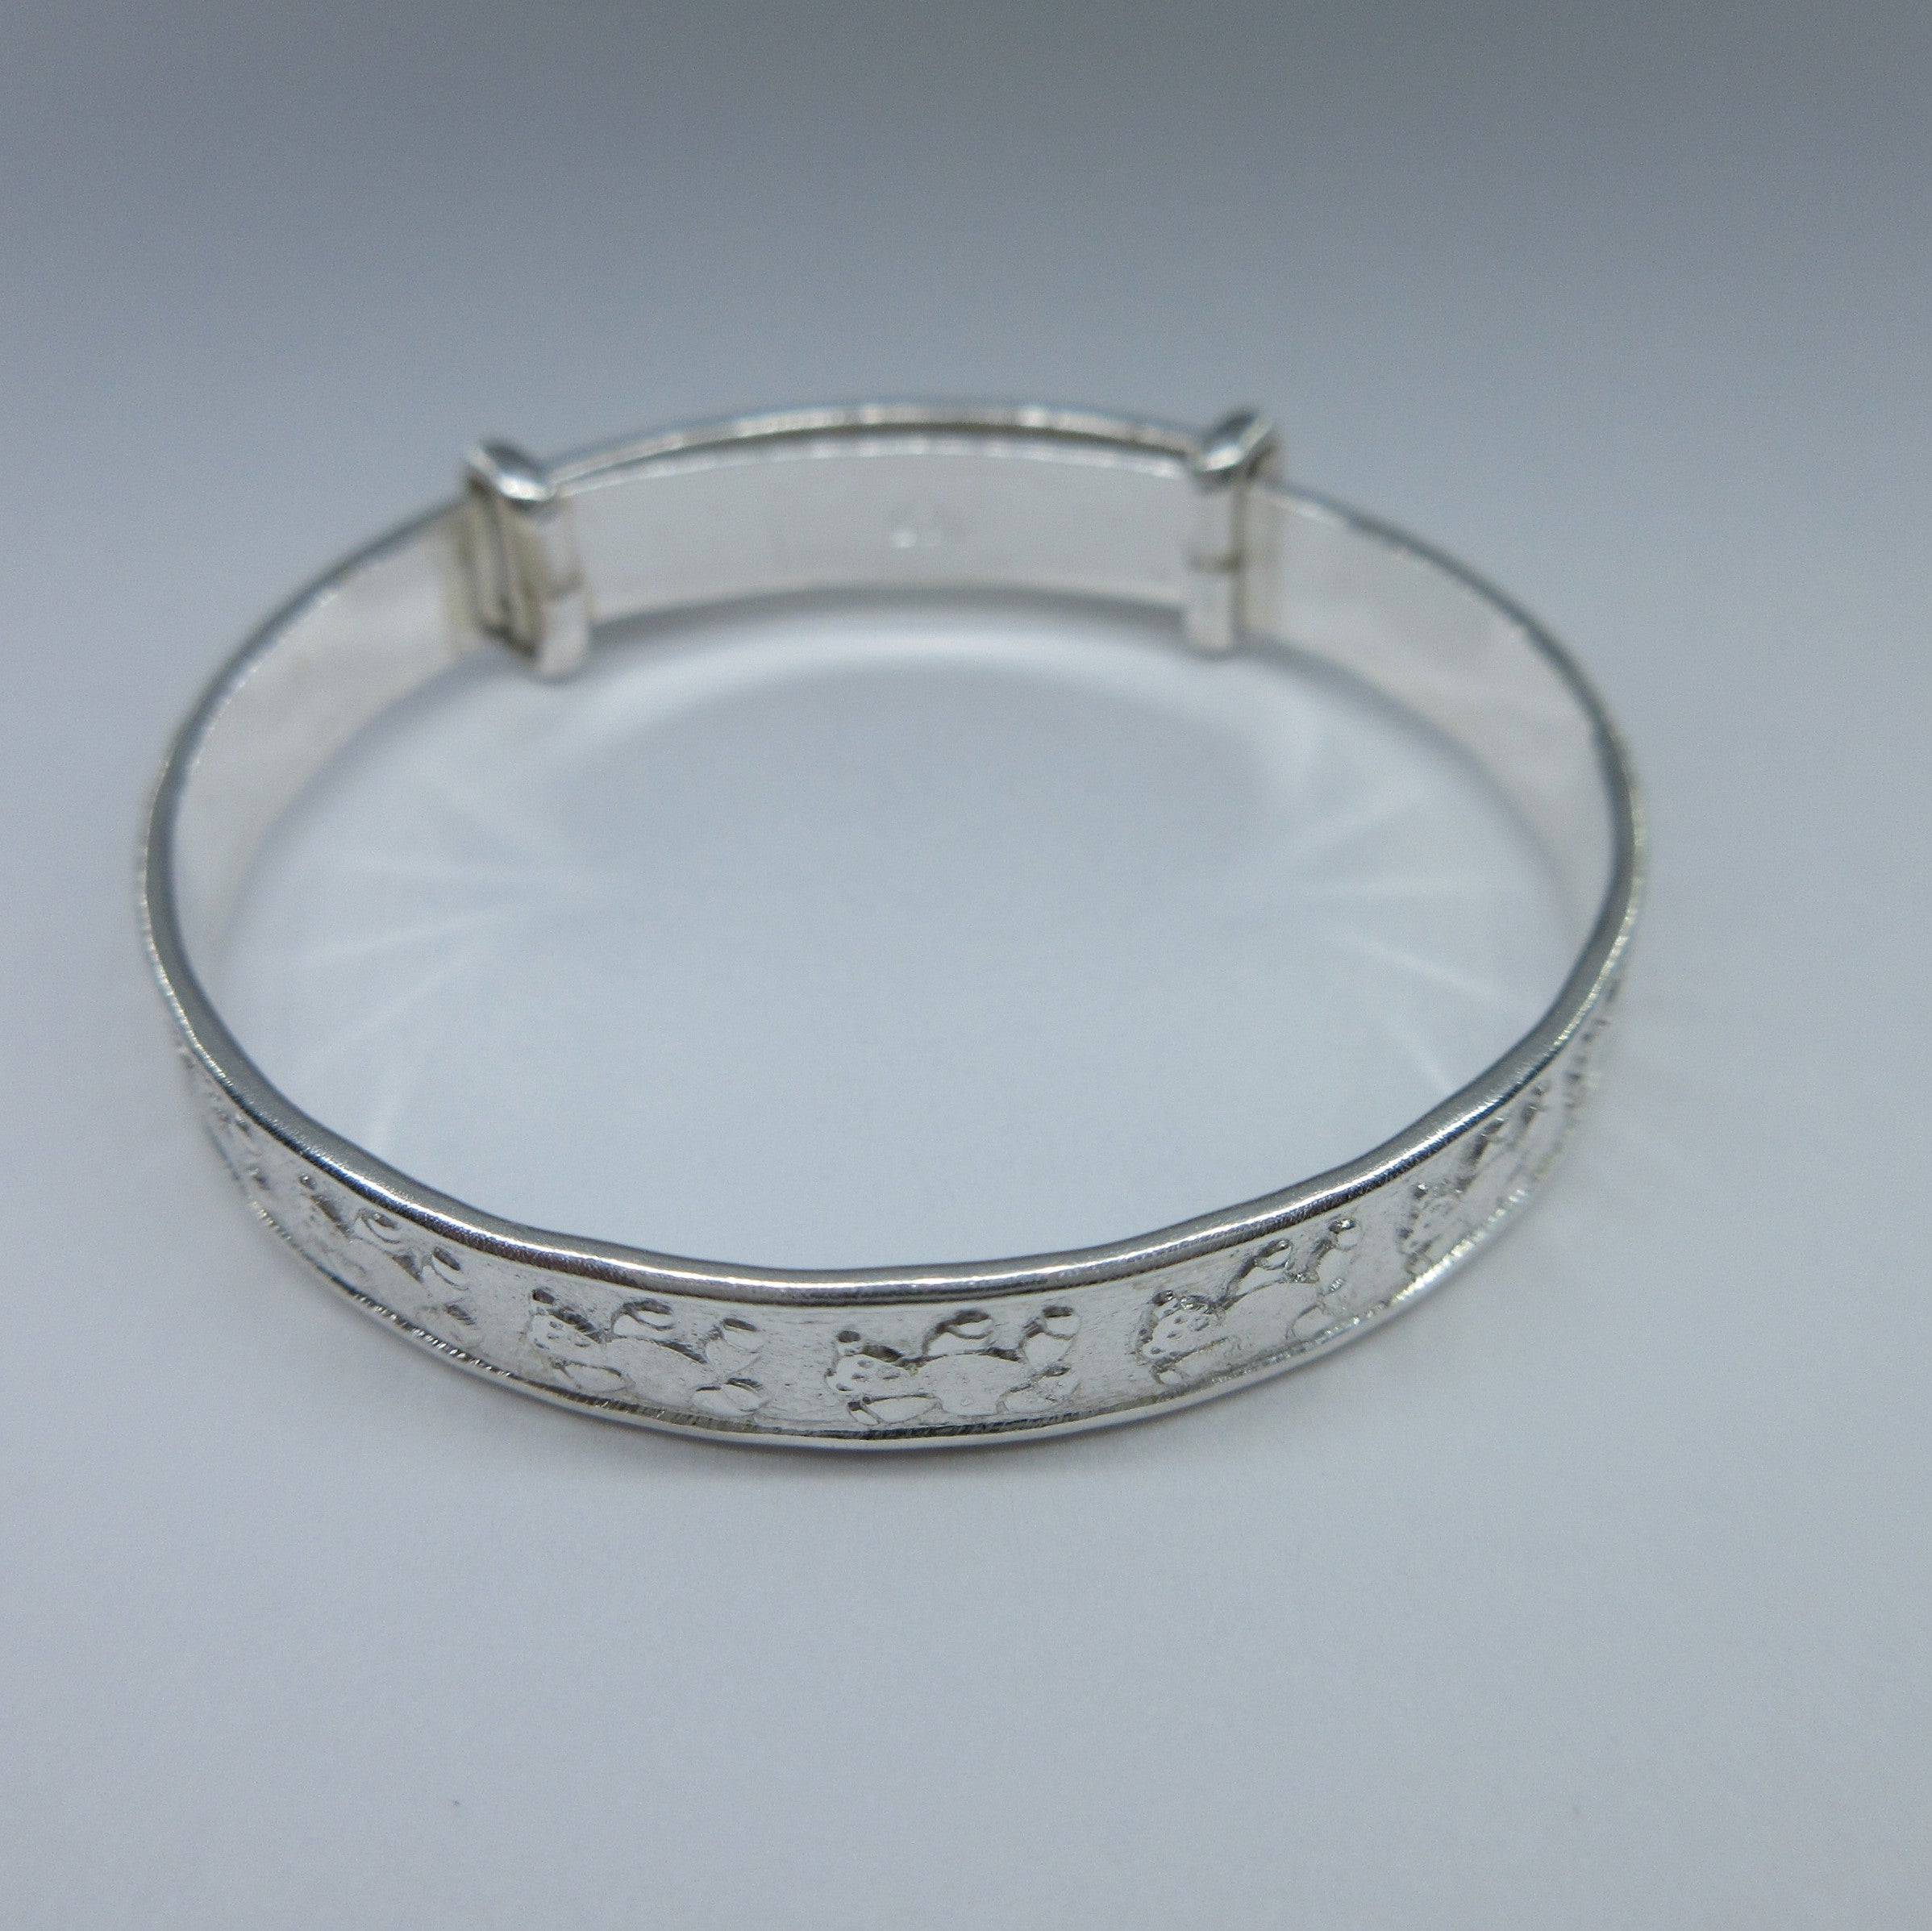 Babies/Childs Silver Expanding Bangle